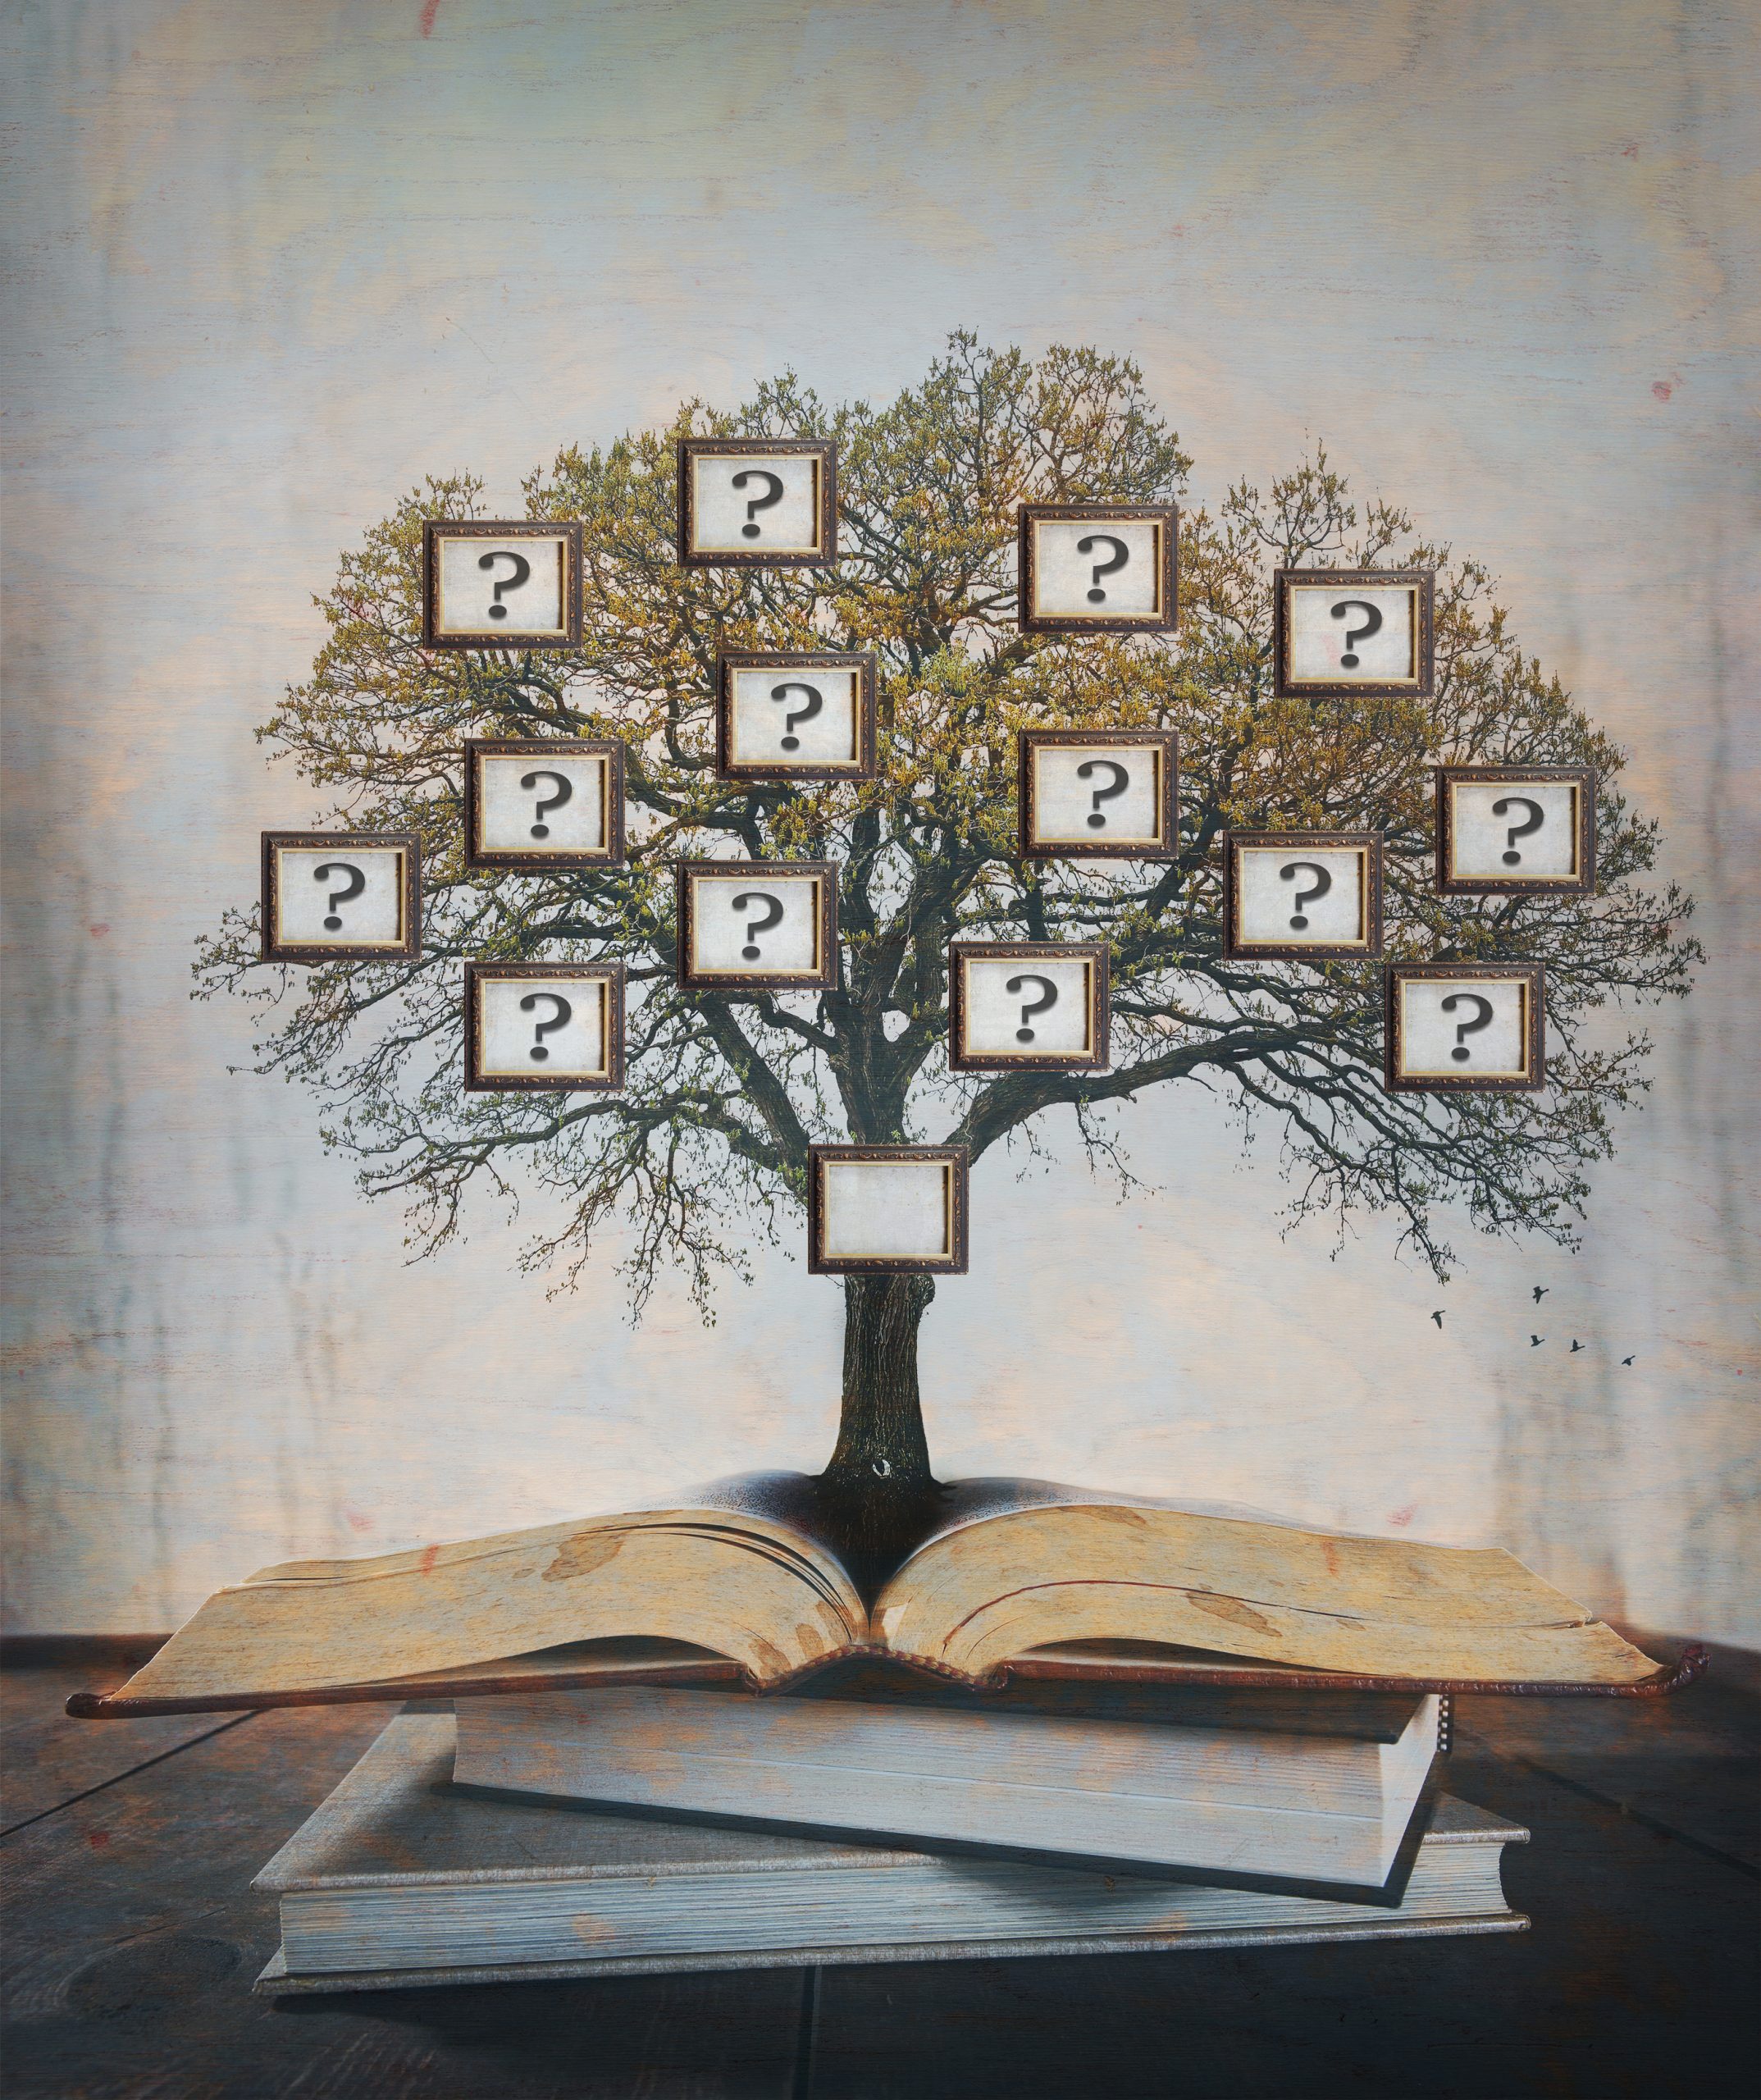 Picture of genealogy tree with hands for leaves